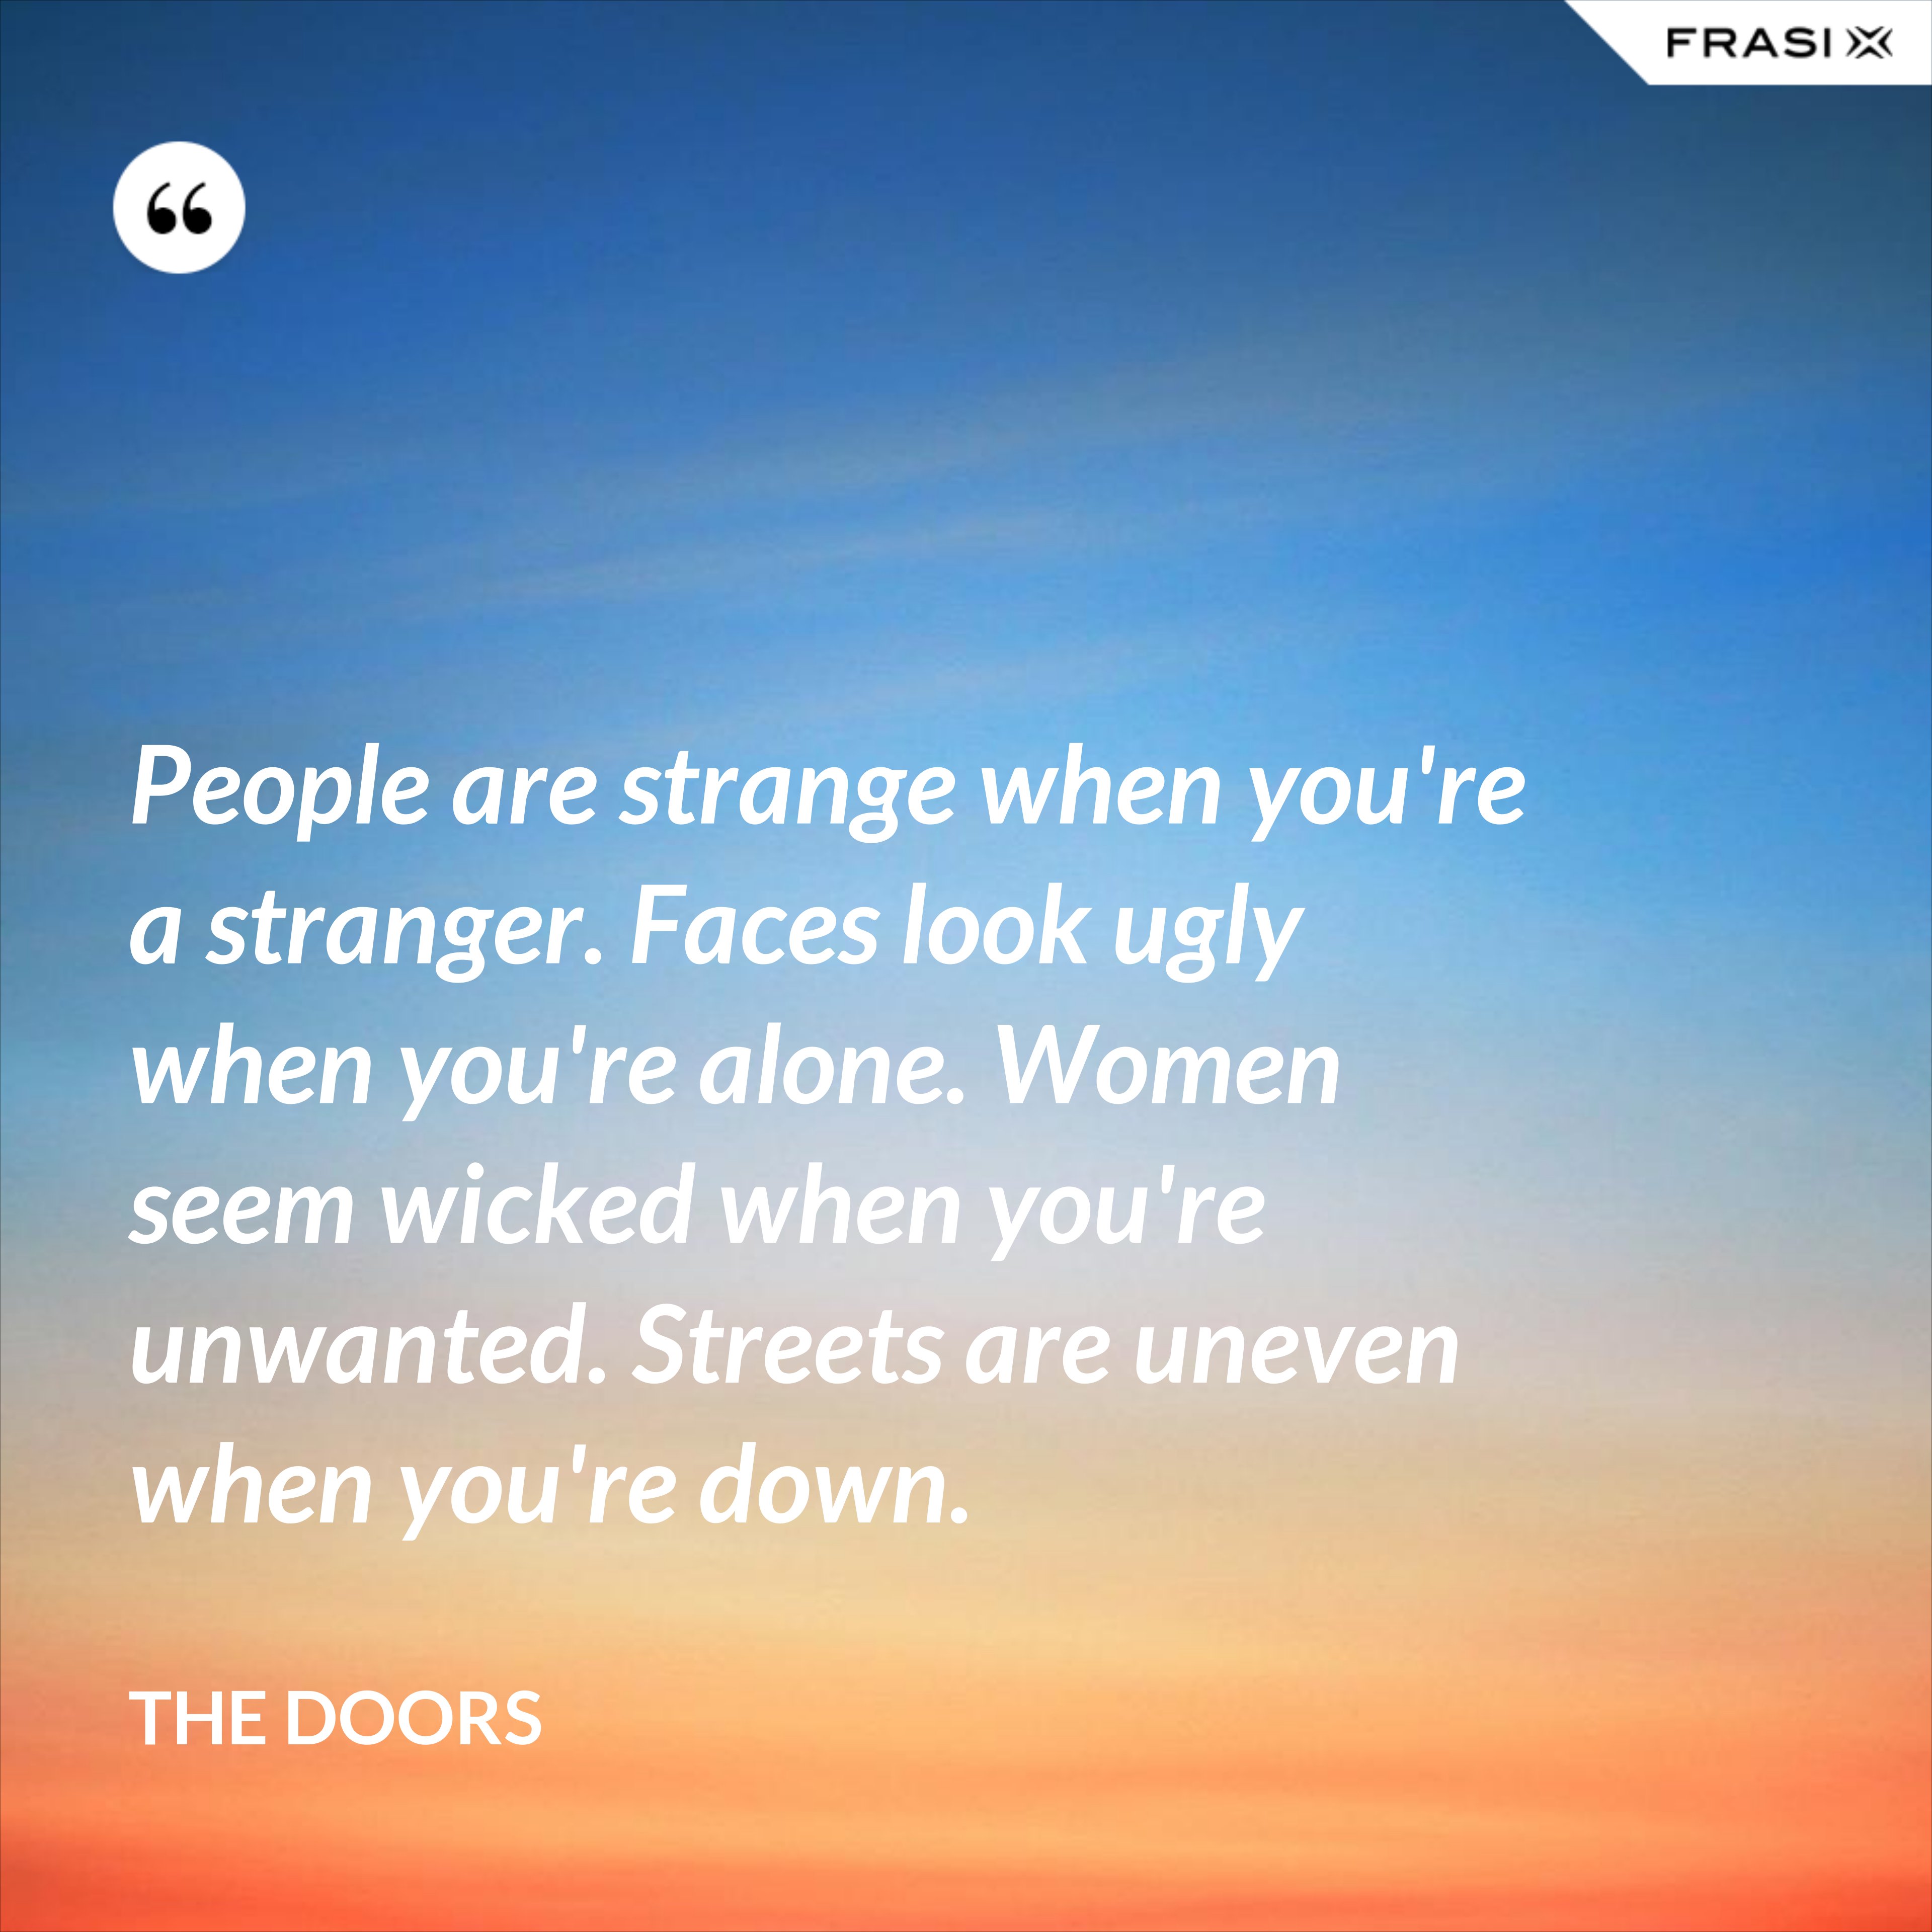 People are strange when you're a stranger. Faces look ugly when you're alone. Women seem wicked when you're unwanted. Streets are uneven when you're down. - The Doors